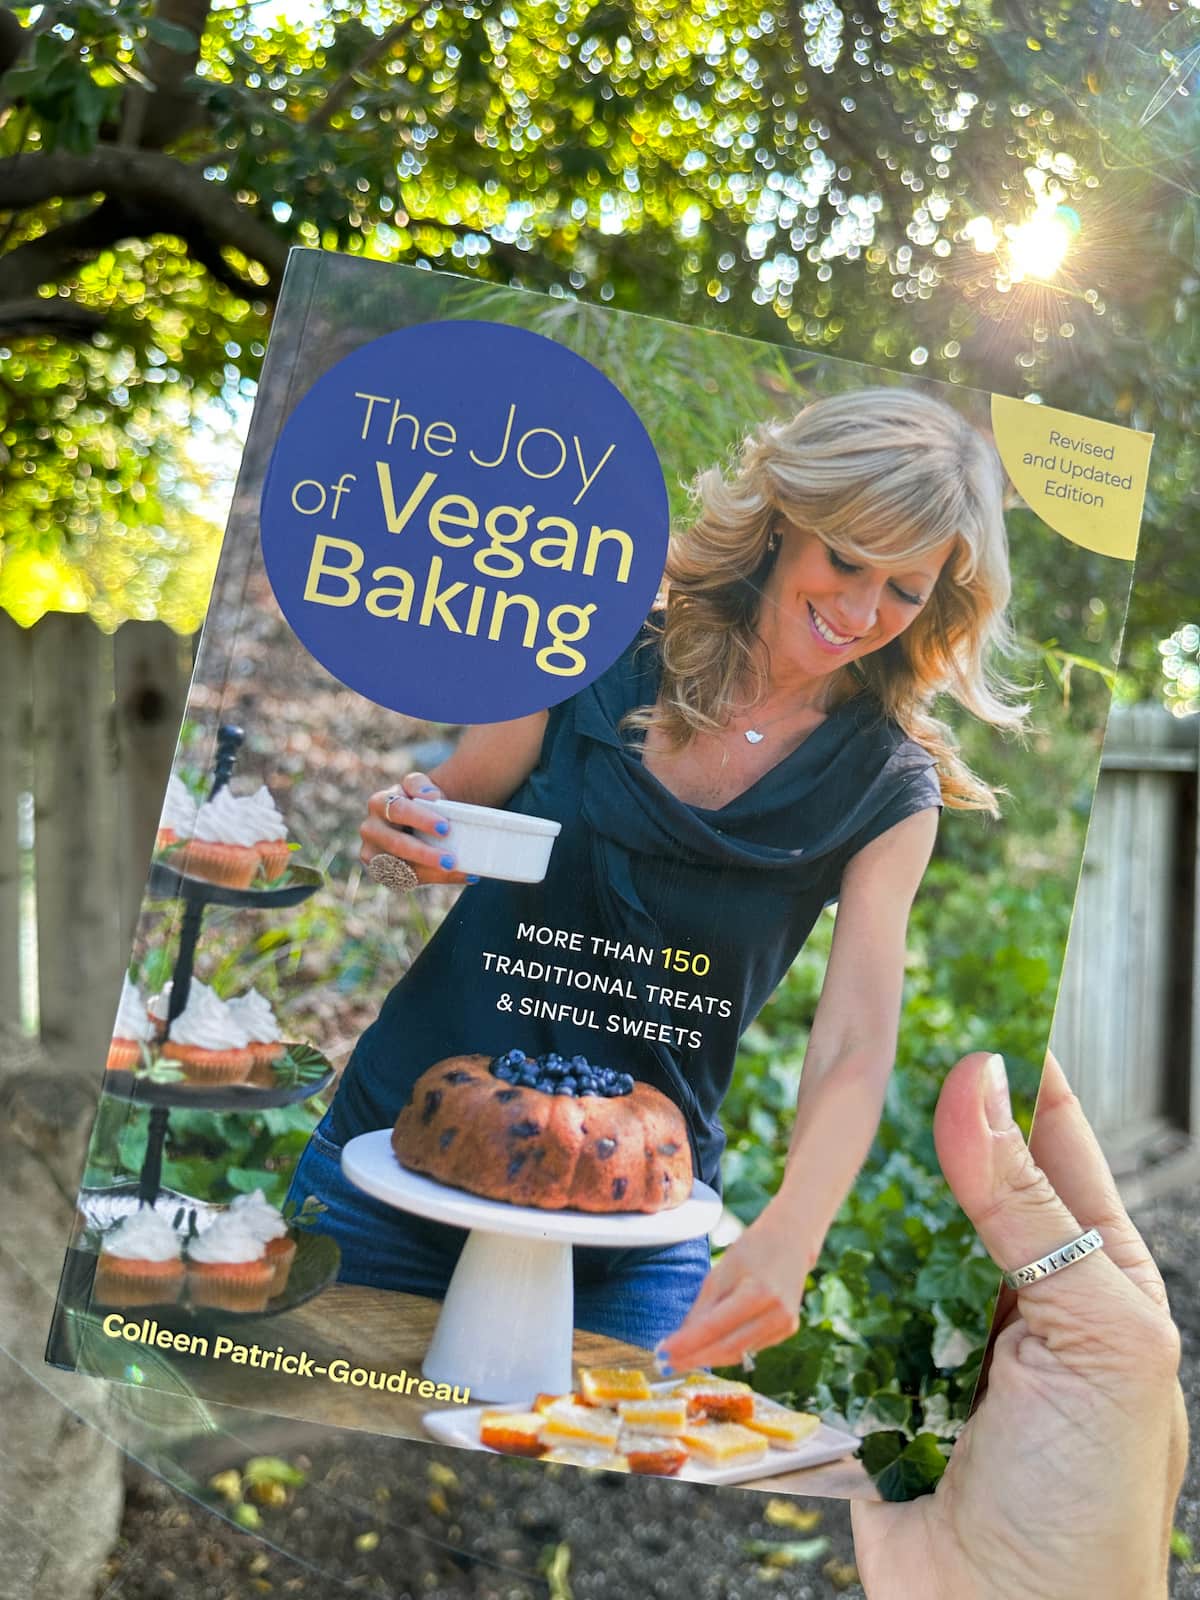 Cover art for The Joy of Vegan Baking by Colleen Patrick-Goudreau.